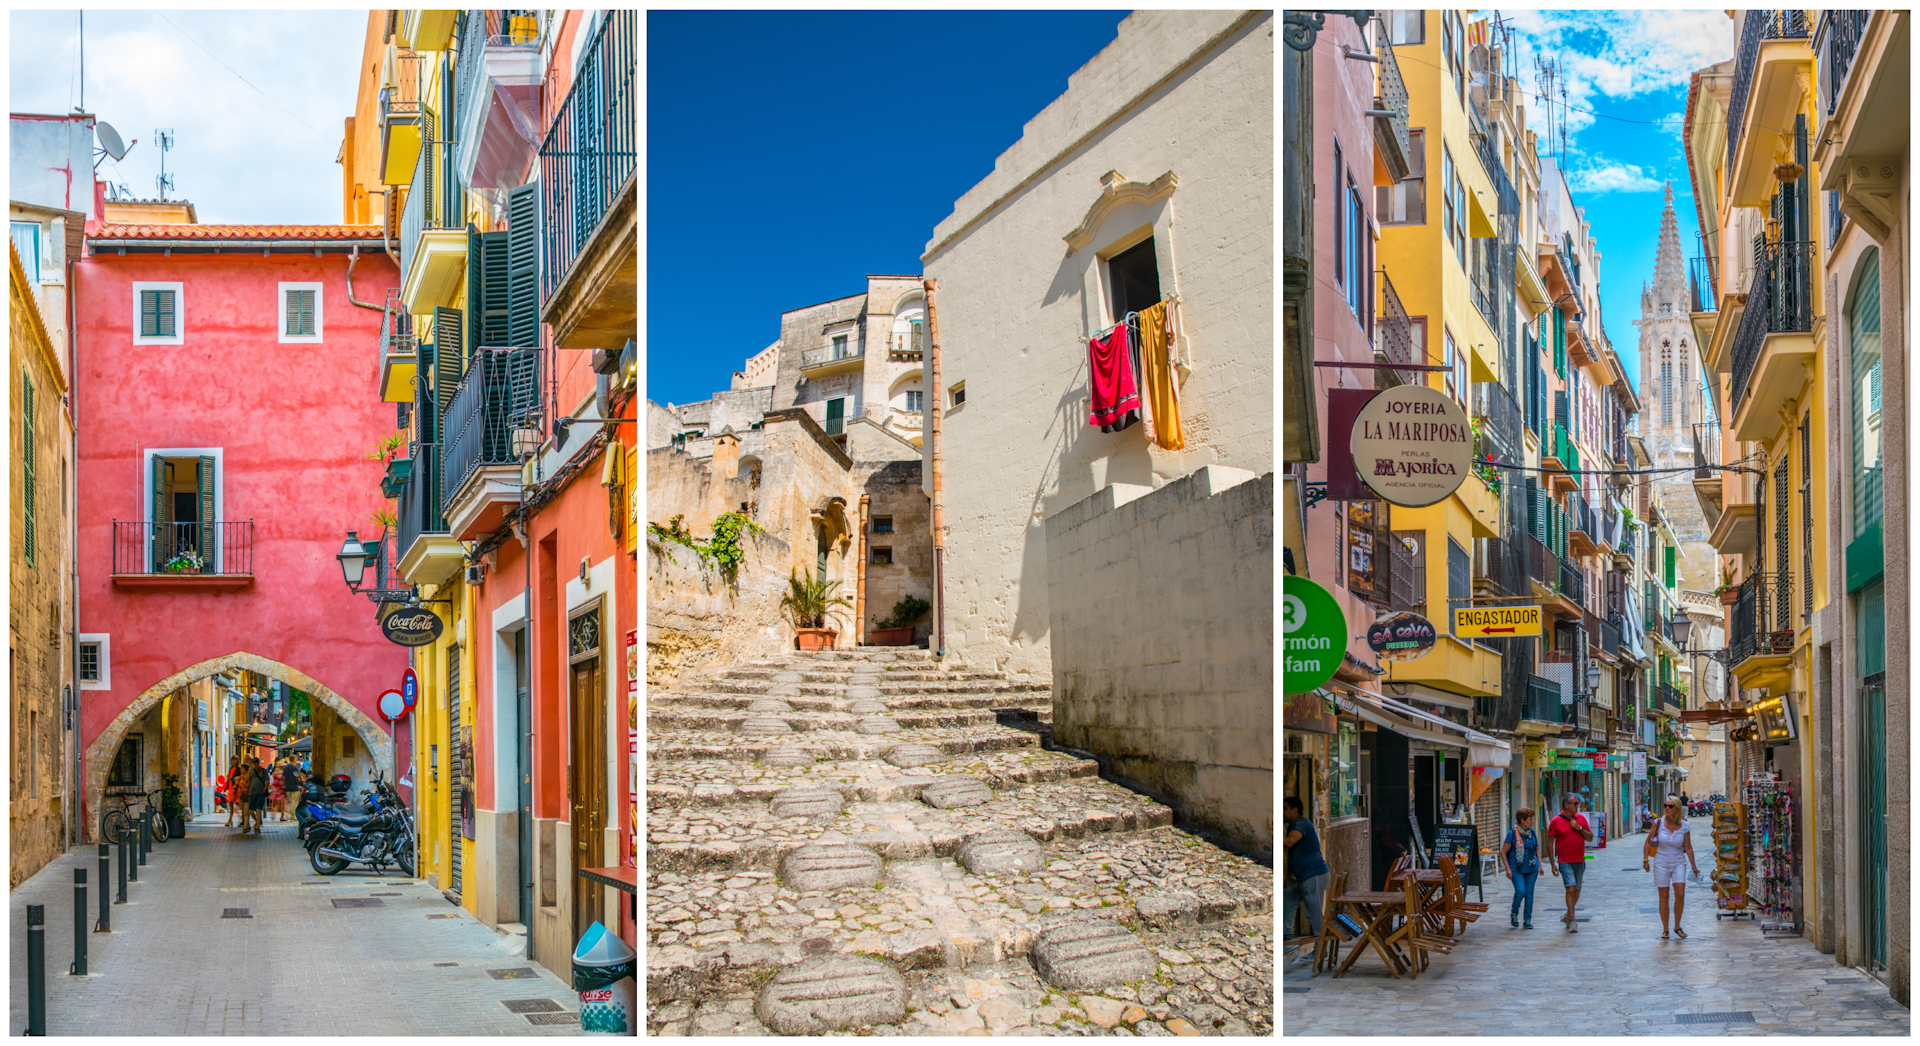 The pastel-colored buildings of Palma